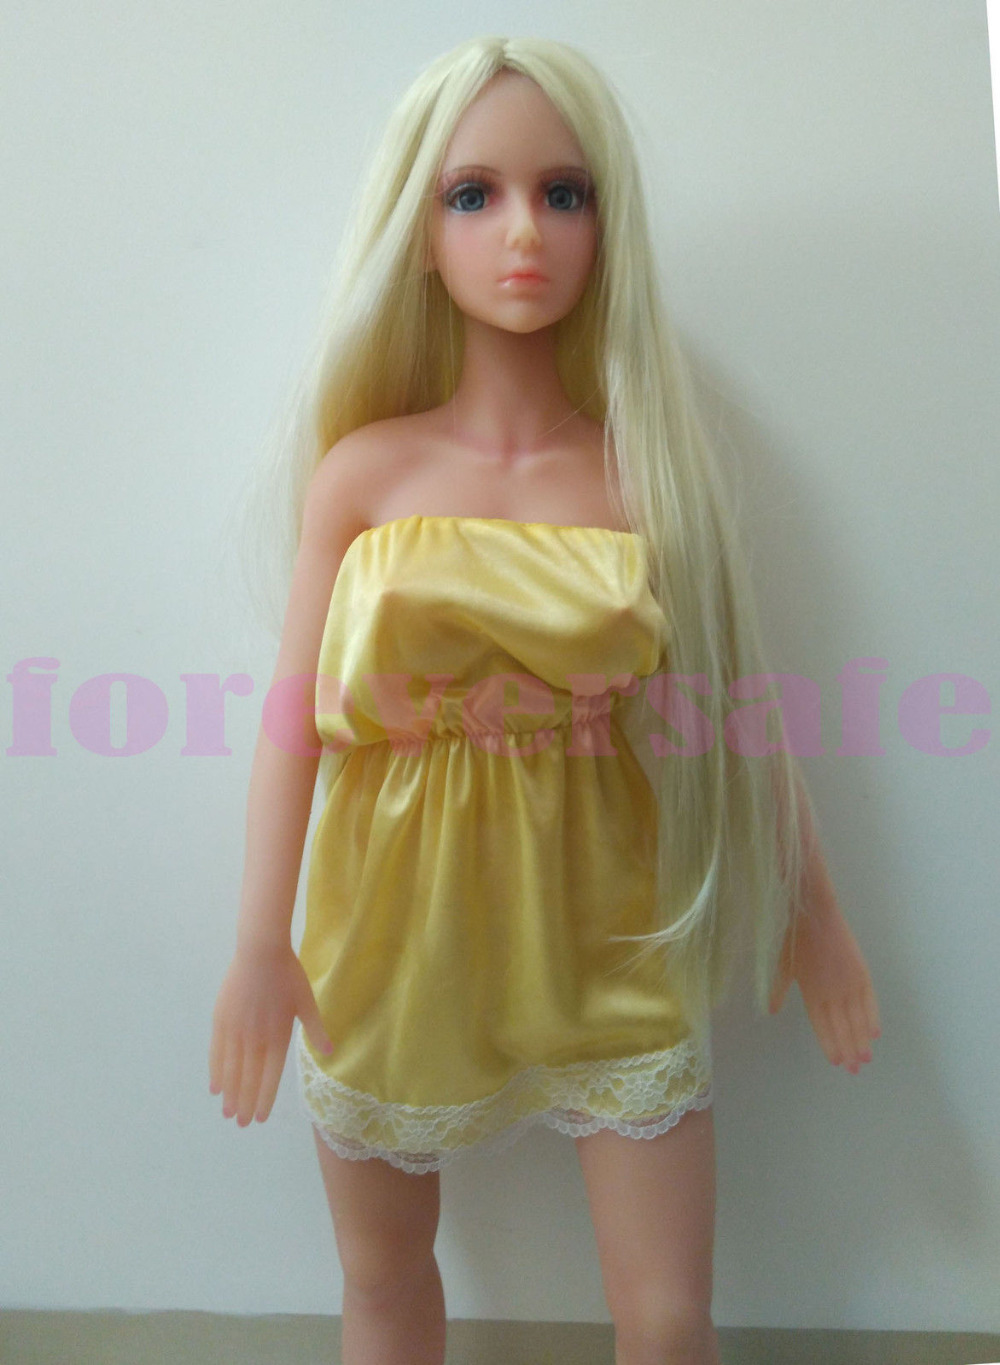 Buy New Jm 75cm Lifelike Solid Love Doll Small Real 8054